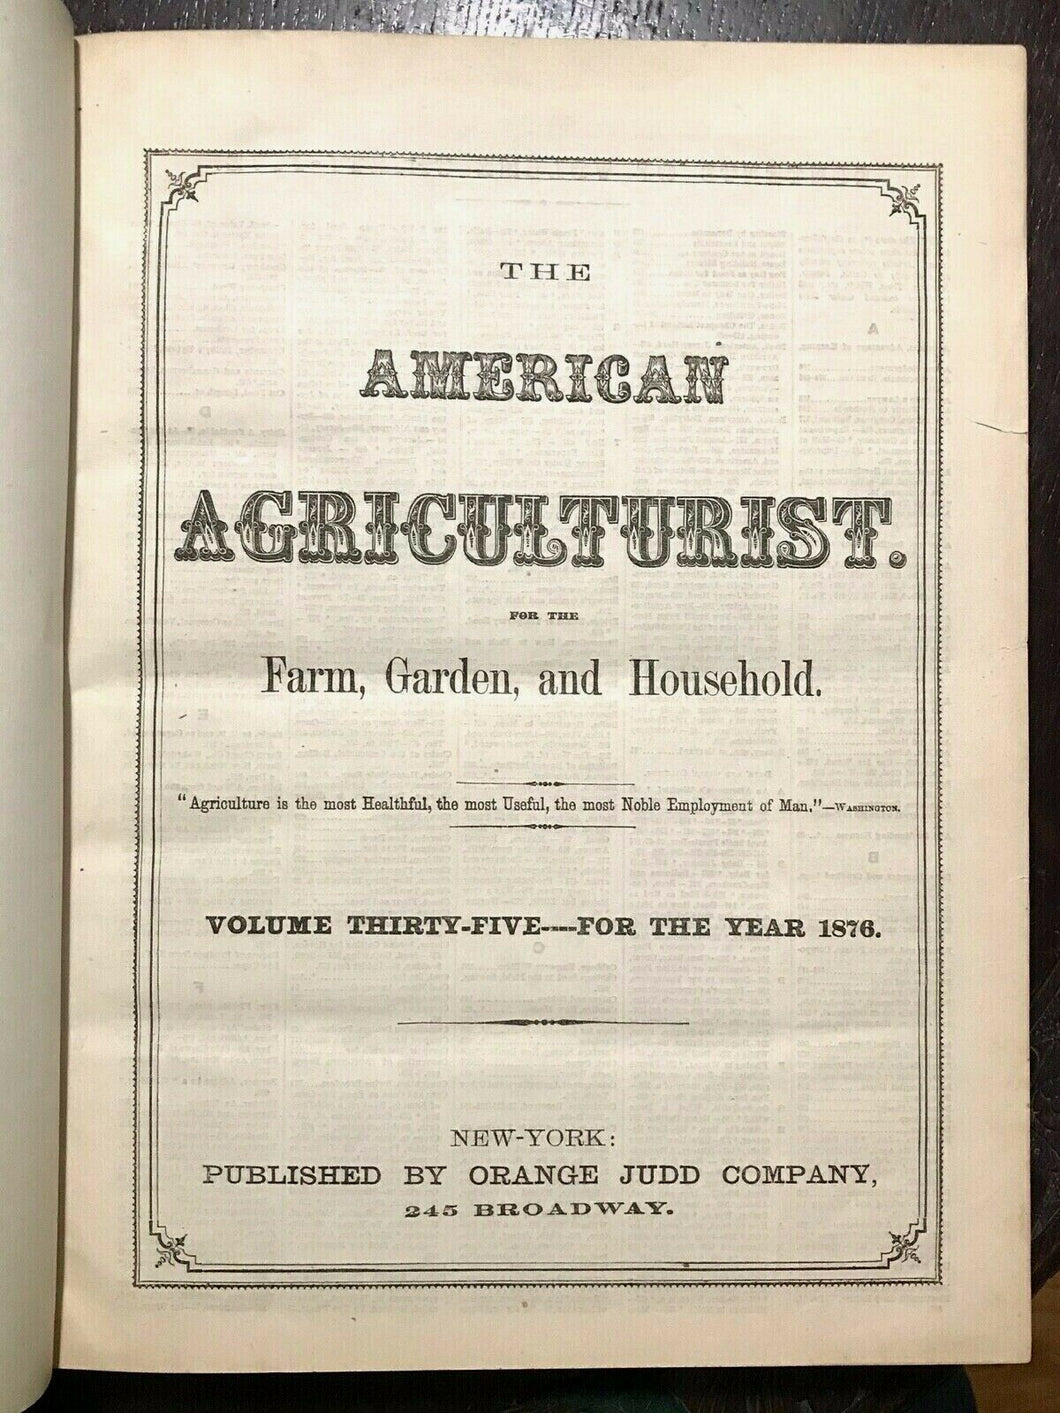 AMERICAN AGRICULTURIST FOR FARM, GARDEN, HOUSEHOLD - 24 Original Issues 1876-77